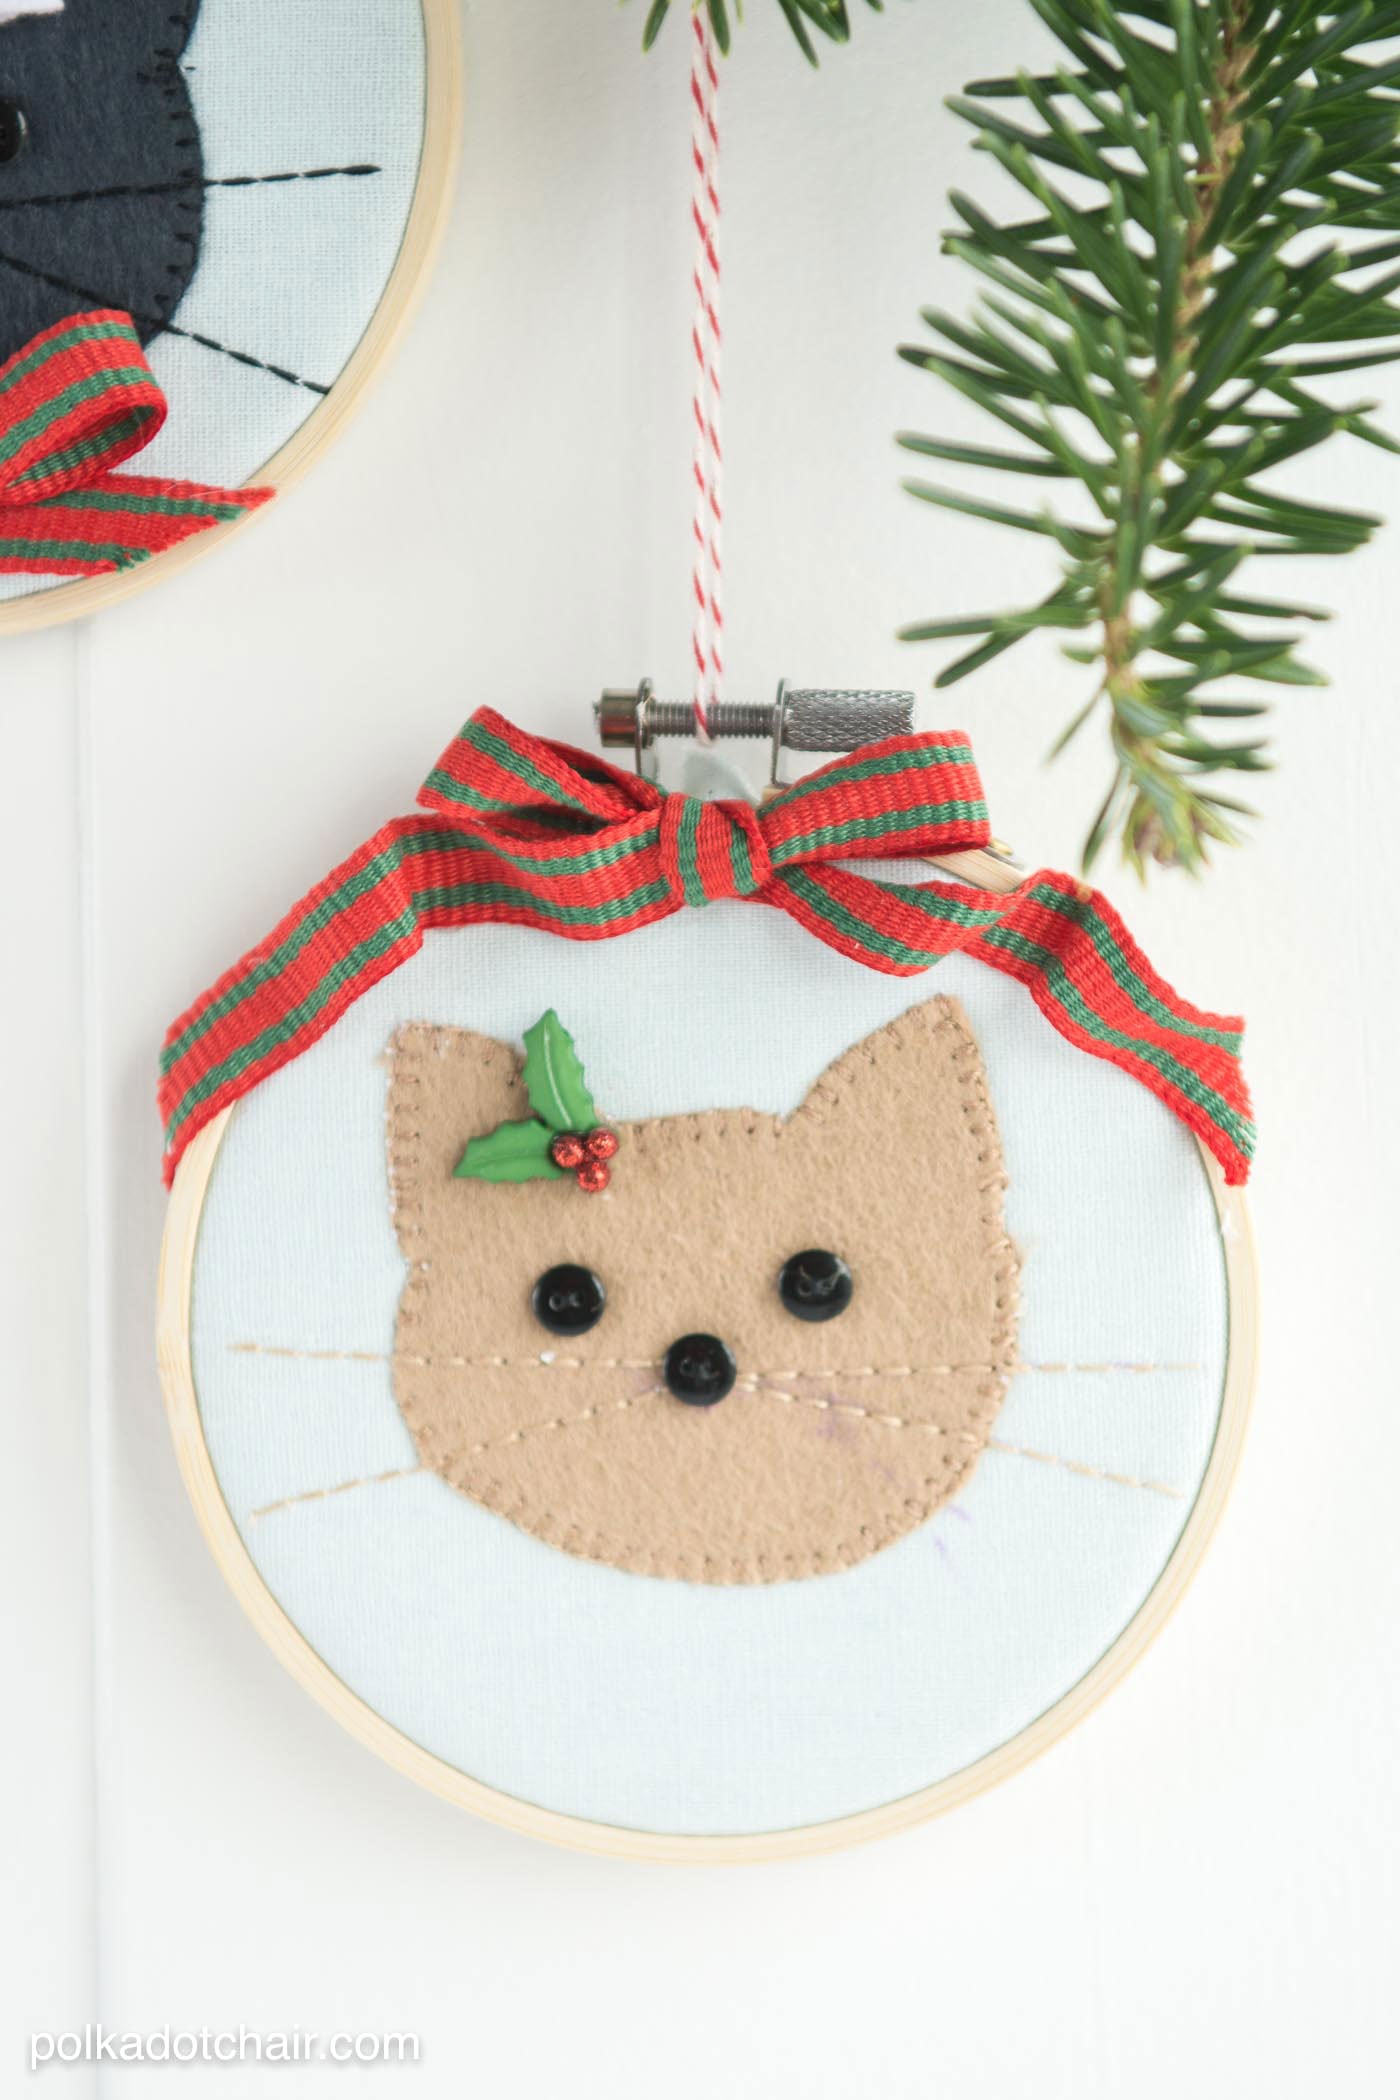 Cat Embroidery Hoop Christmas Ornaments - The Polka Dot Chair